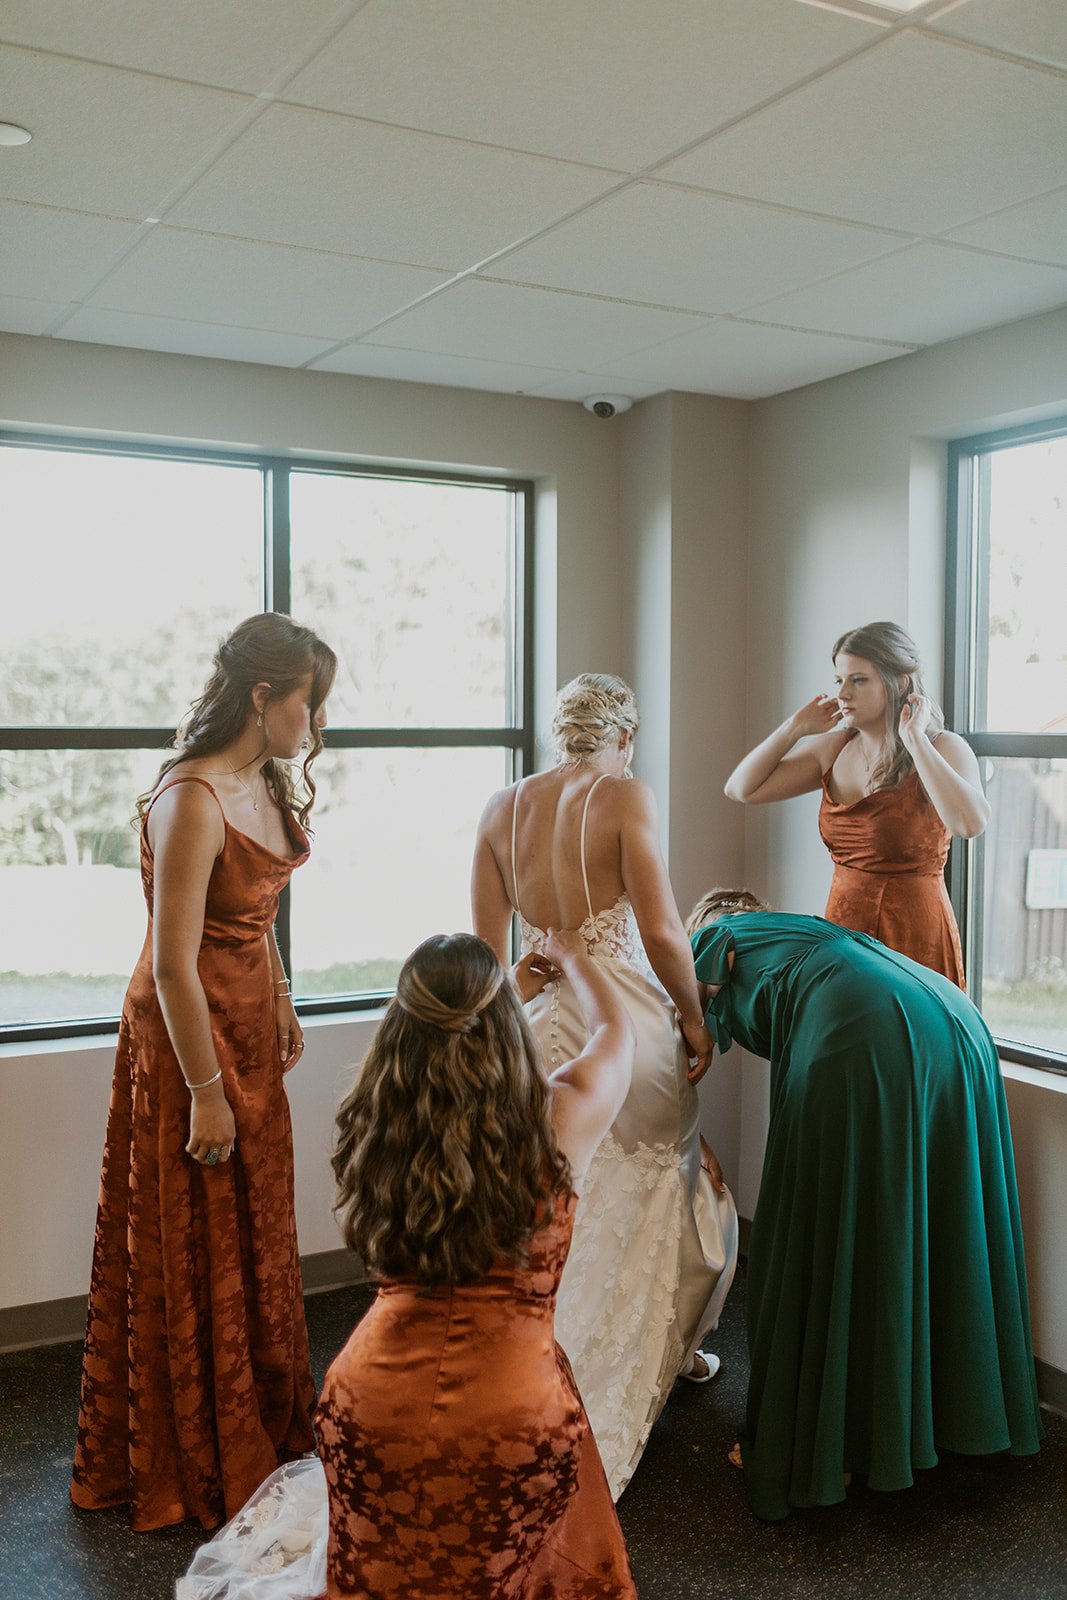 The bridal party assist the bride in getting dressed. 